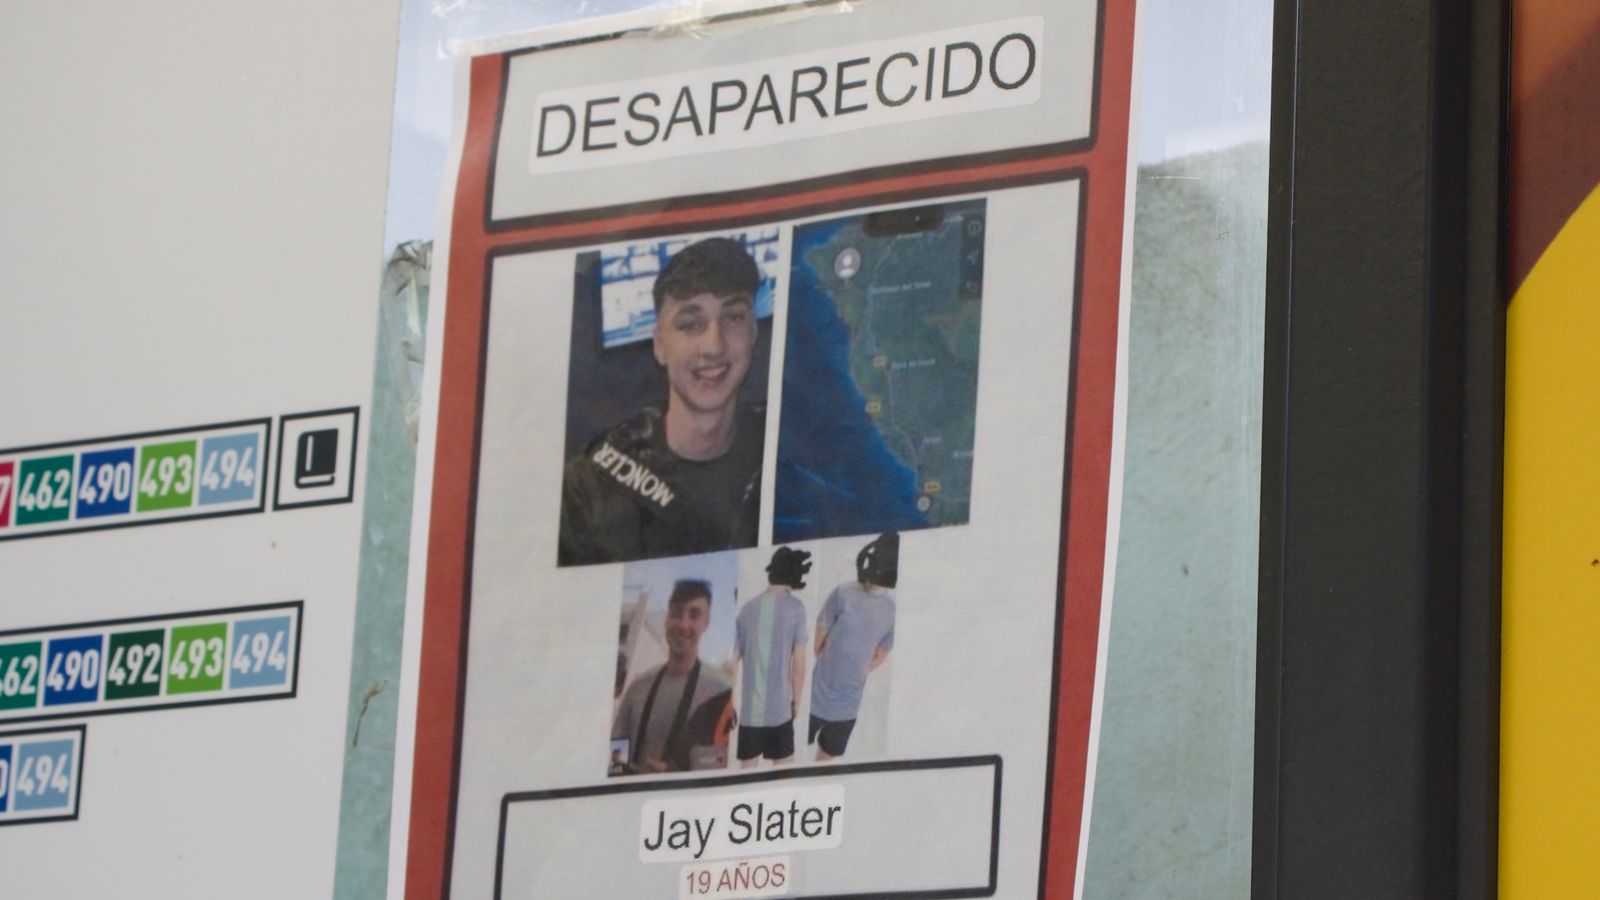 Jay Slater: Today feels like the beginning of one last push to try to find missing teenager